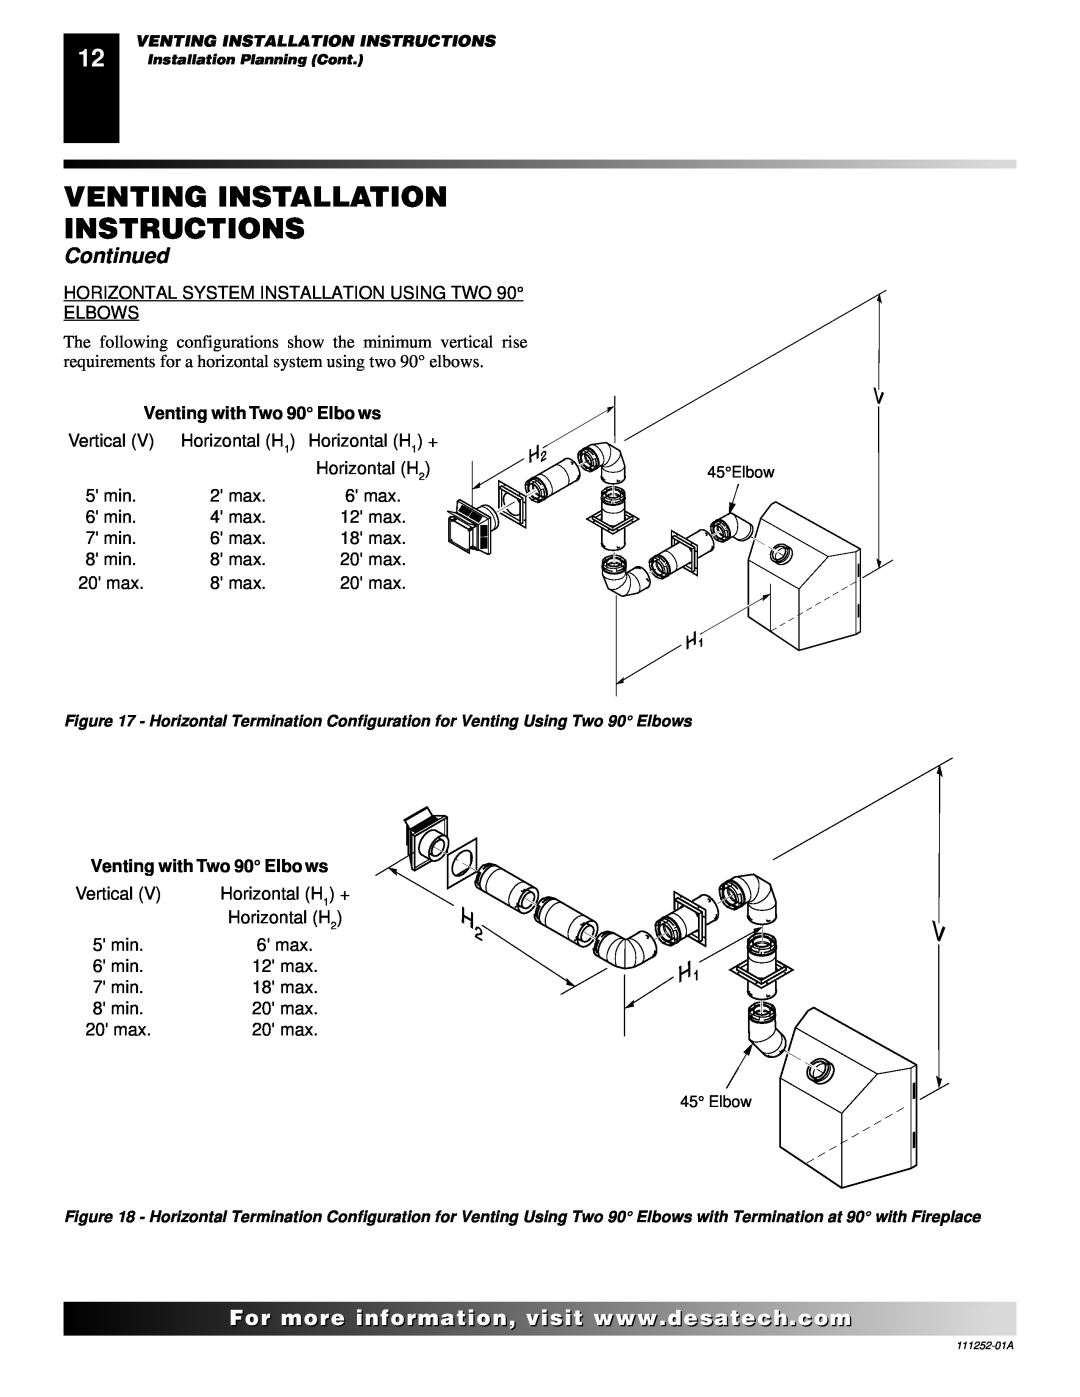 Desa CHDV36NRA installation manual Venting Installation Instructions, Continued, Venting with Two 90 Elbo ws 